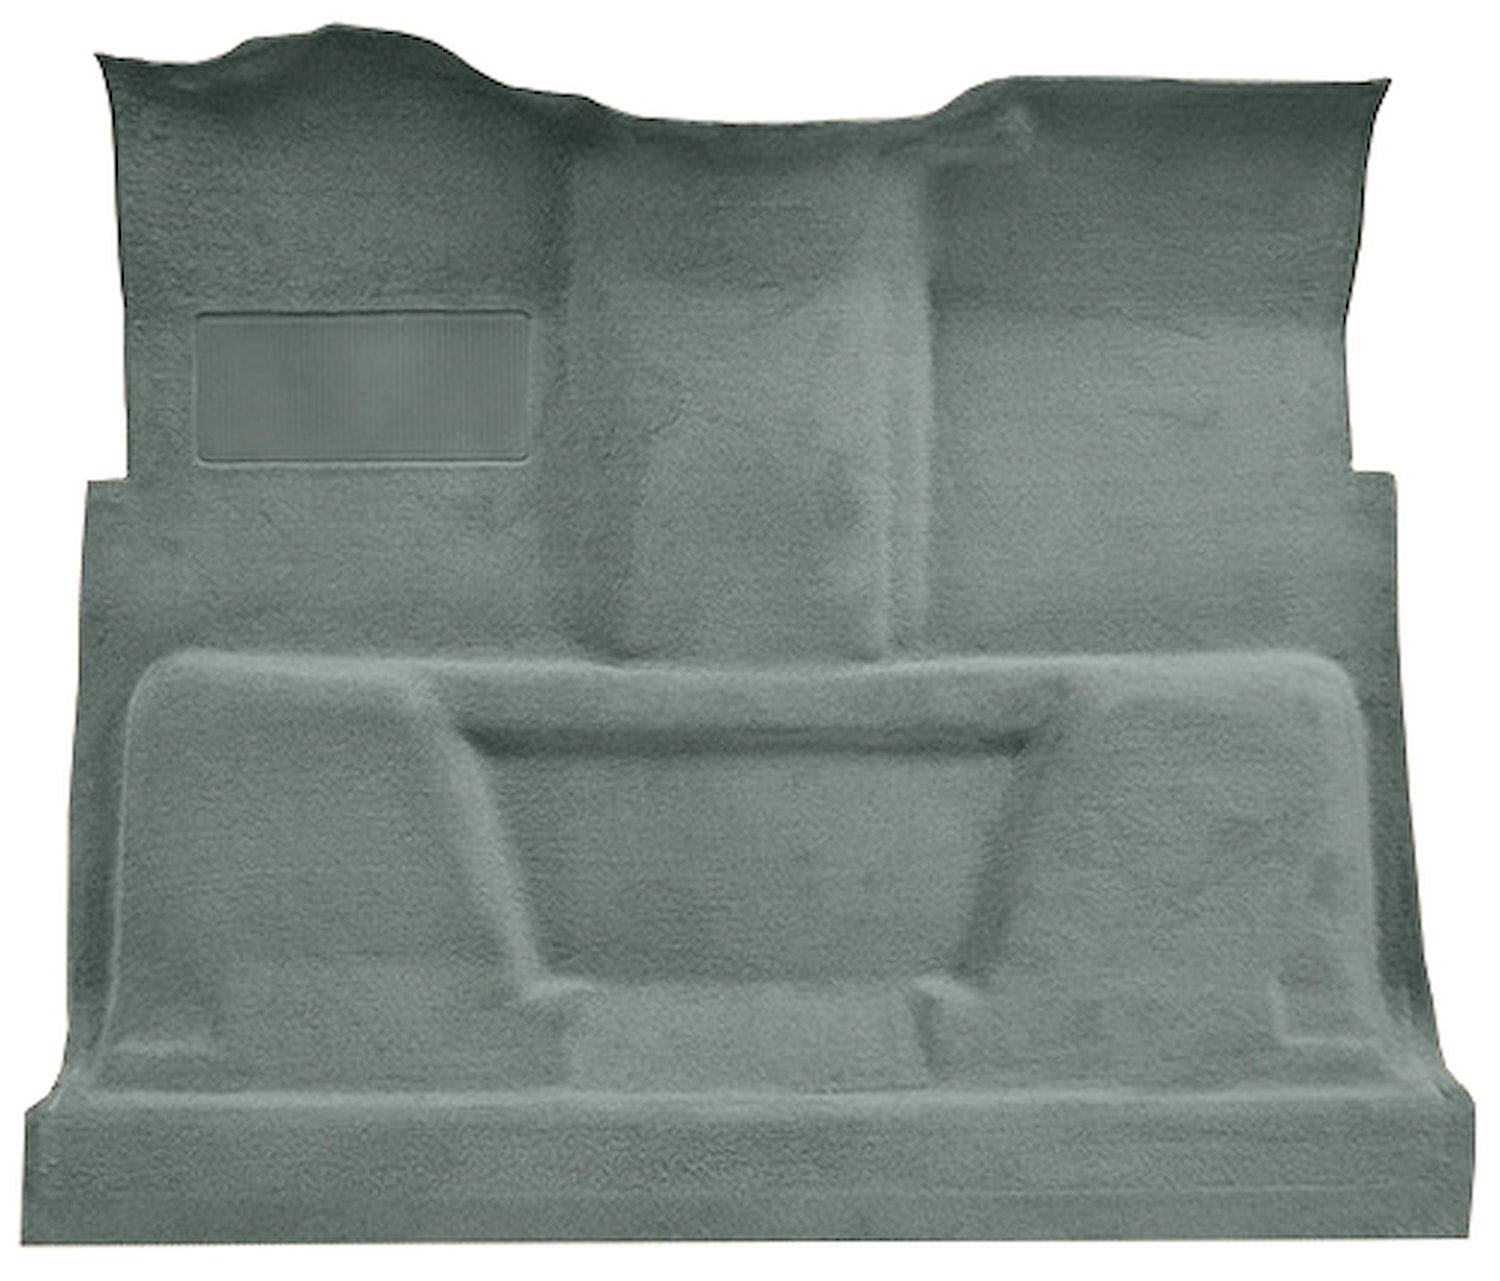 Molded Cut Pile Carpet for 1975-1980 GM C Series Regular Cab Trucks w/TH350 or 3-Speed Manual [Mass Backing, Dove Gray]